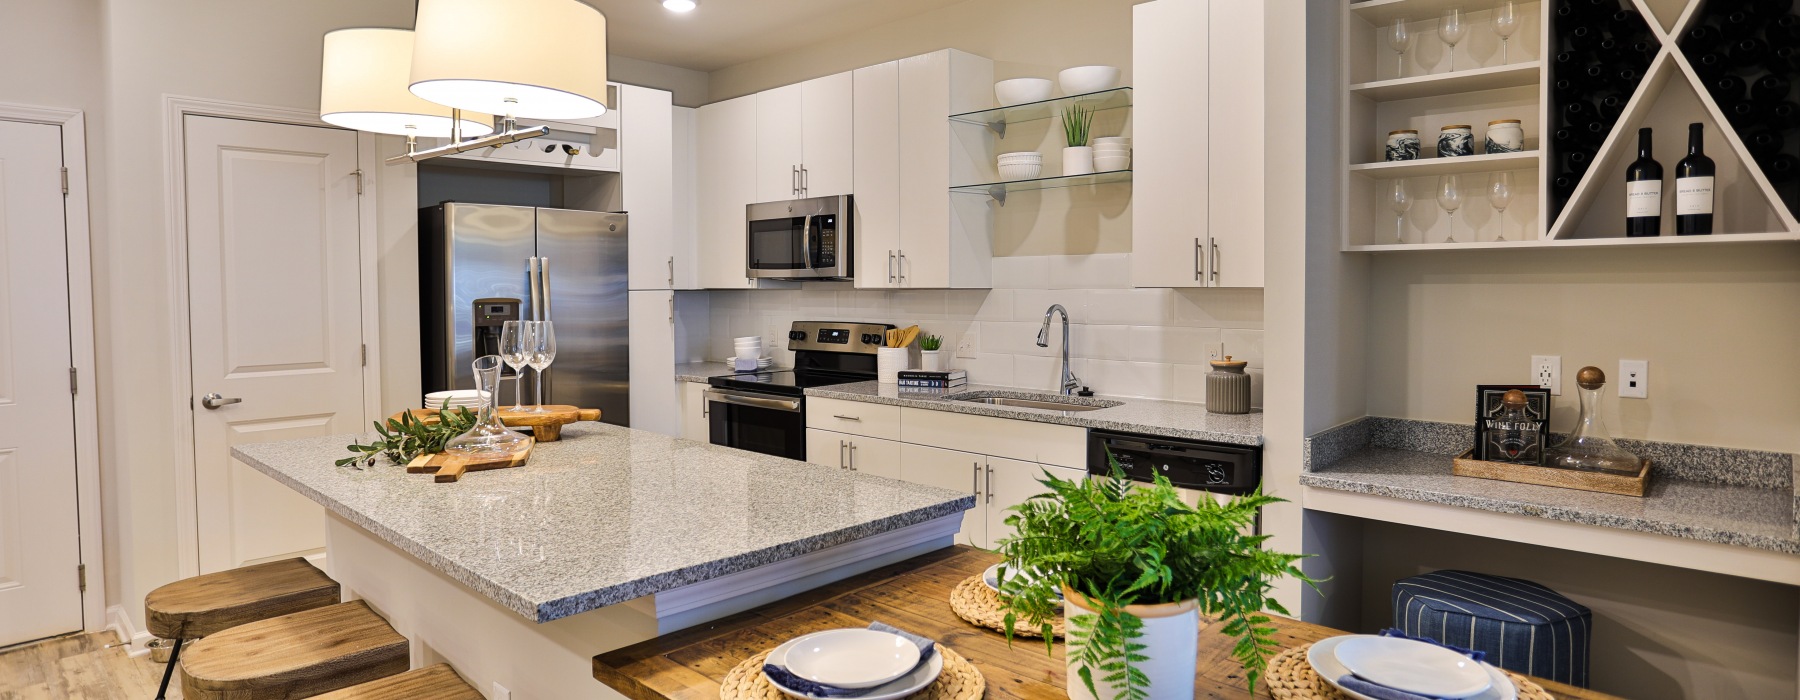 stunning kitchen at Capital Club Apartments featuring wine rack and stainless appliances